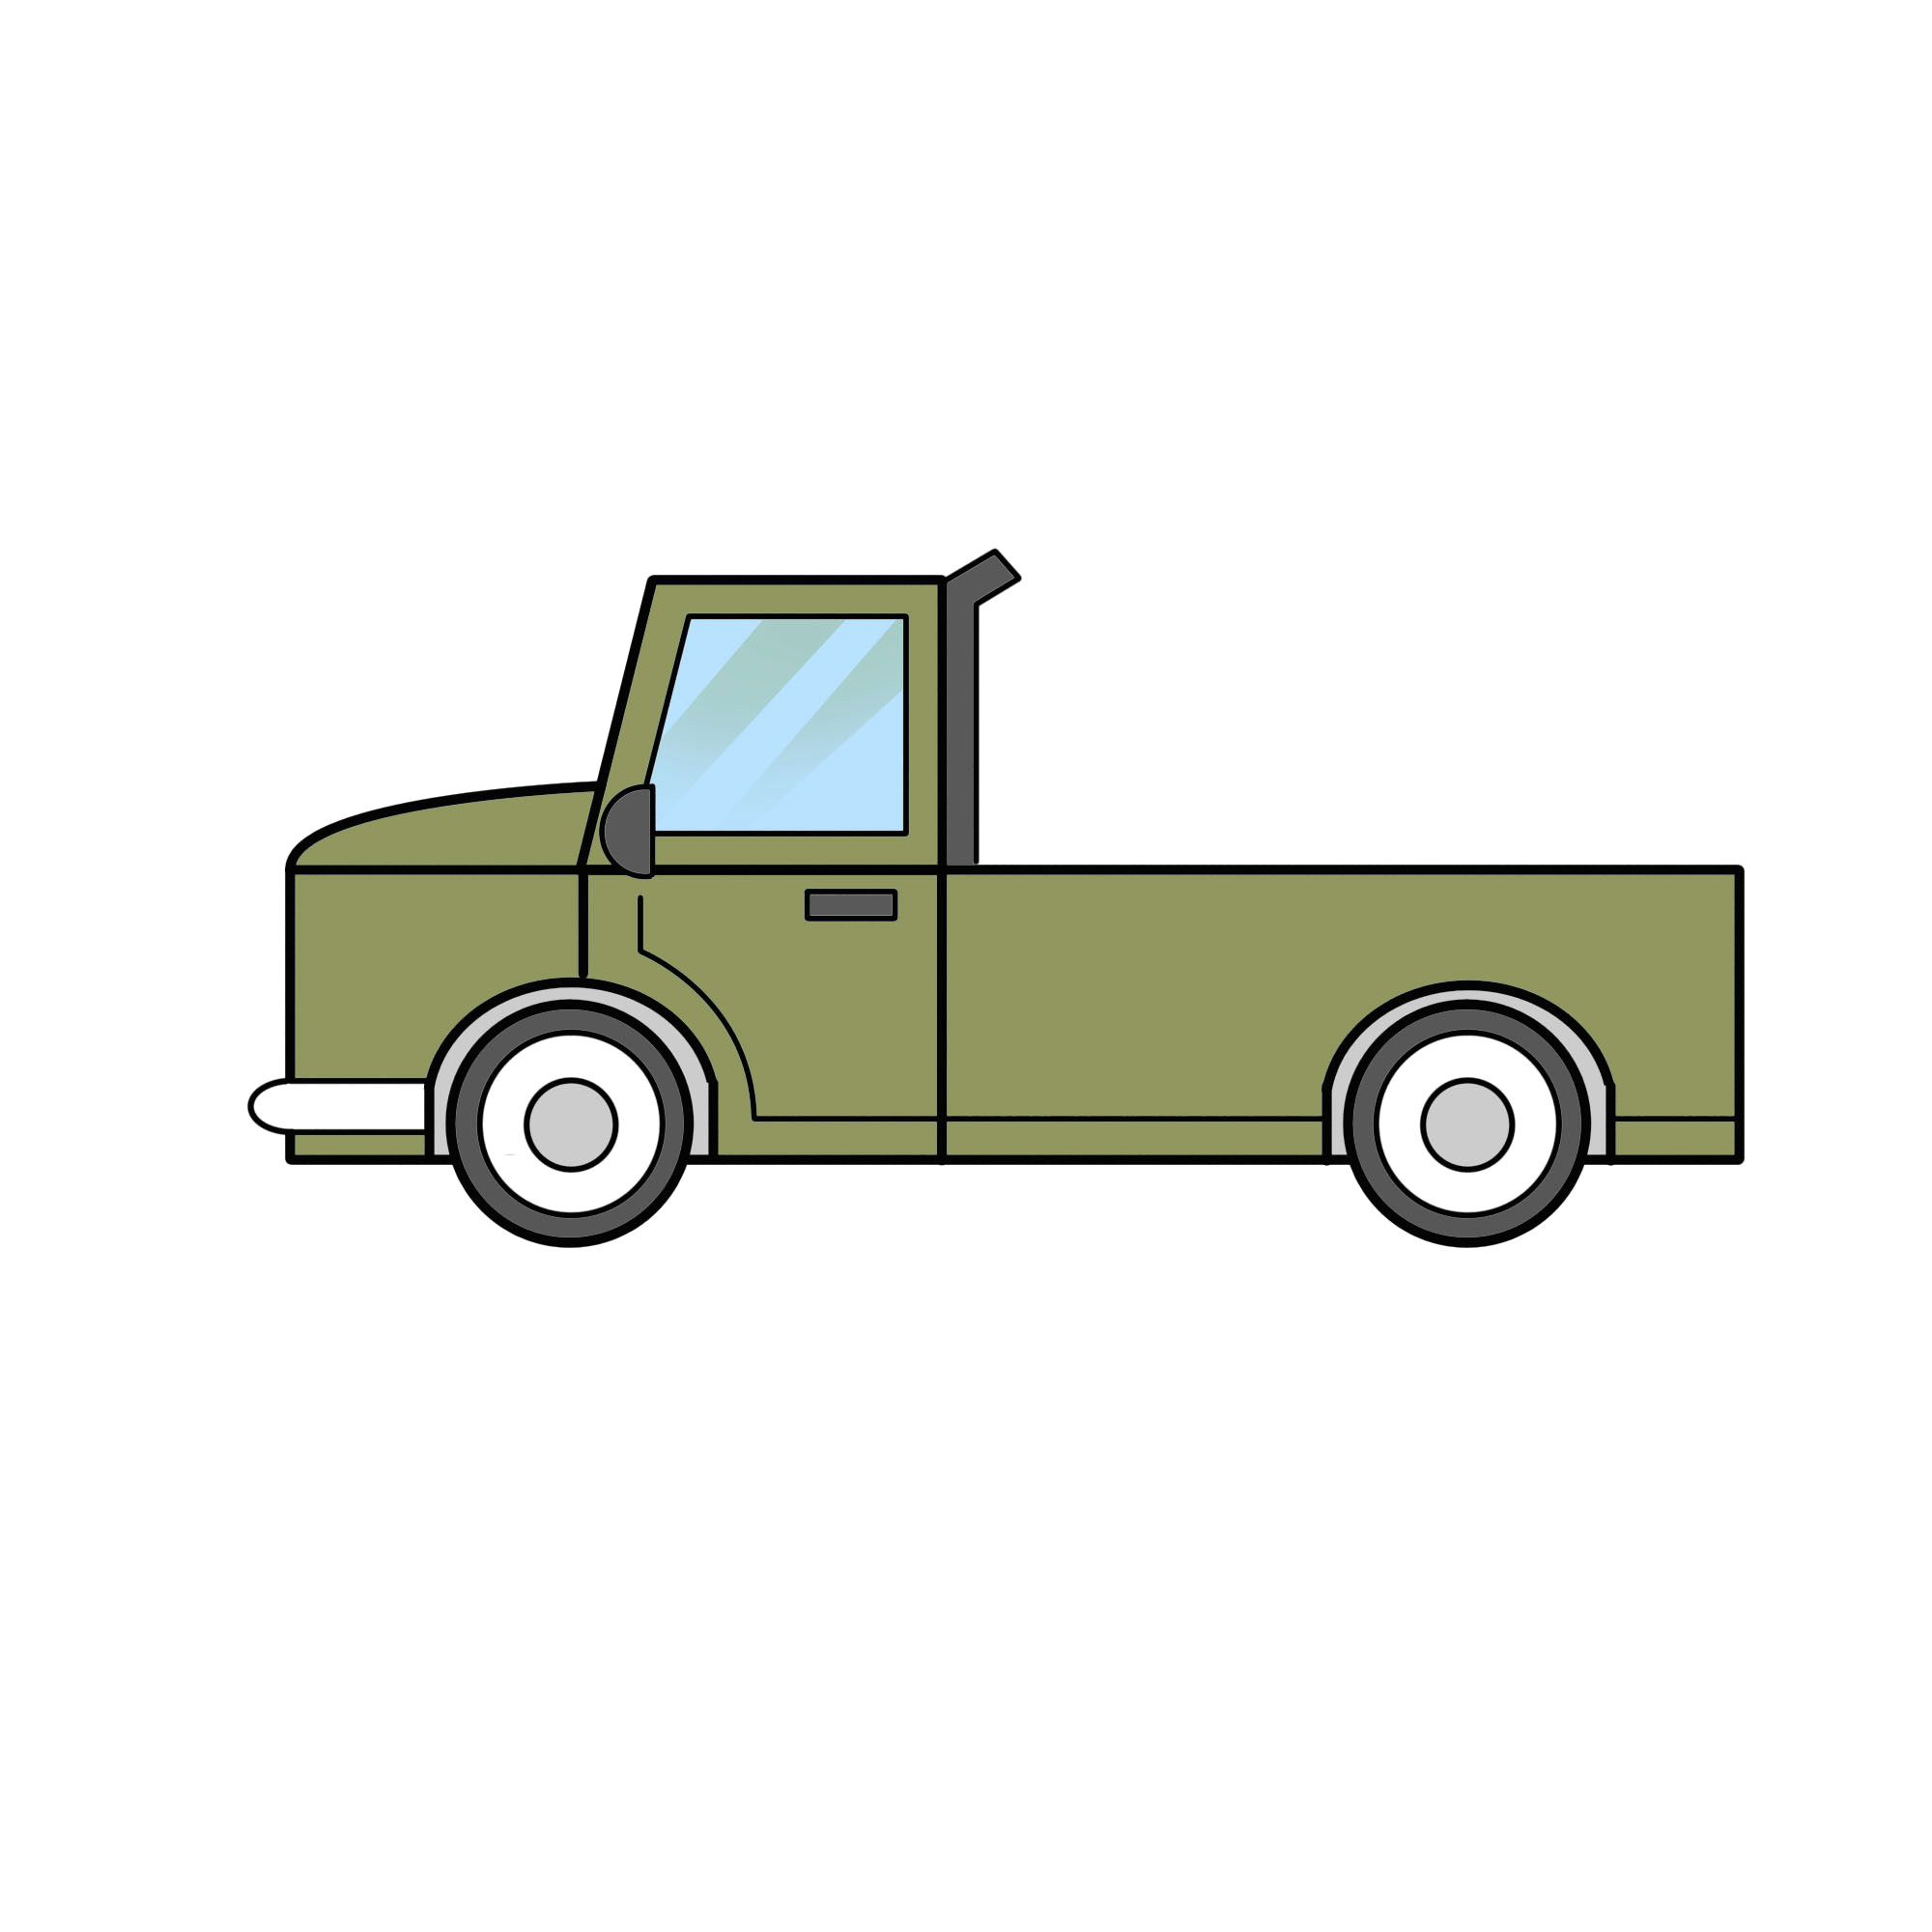 How to Draw Truck Easy 2 Easy Ways to Draw A Truck with Pictures Wikihow